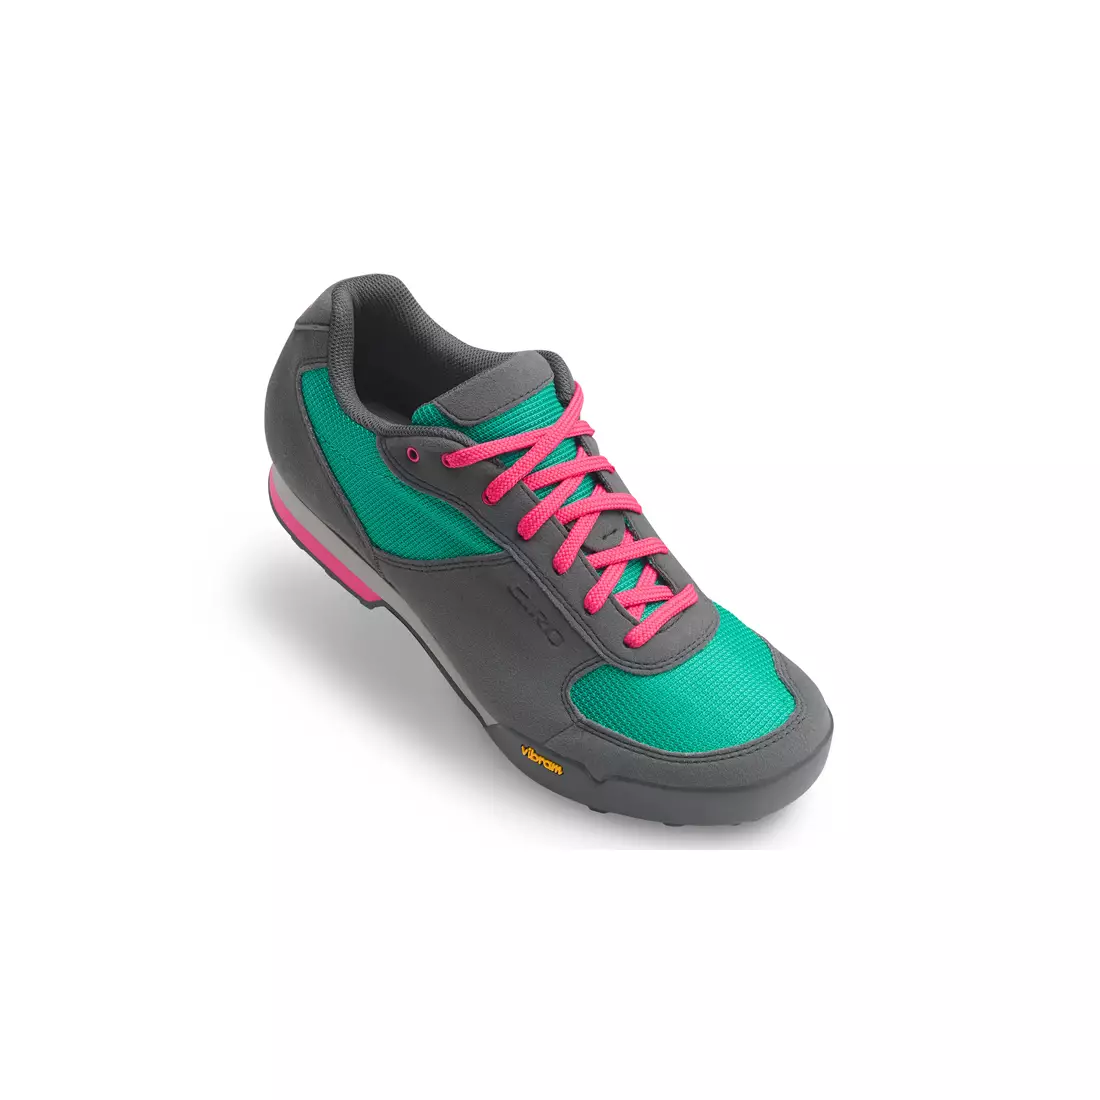 GIRO PETRA VR - ladies' cycling shoes grey-turquoise-pink